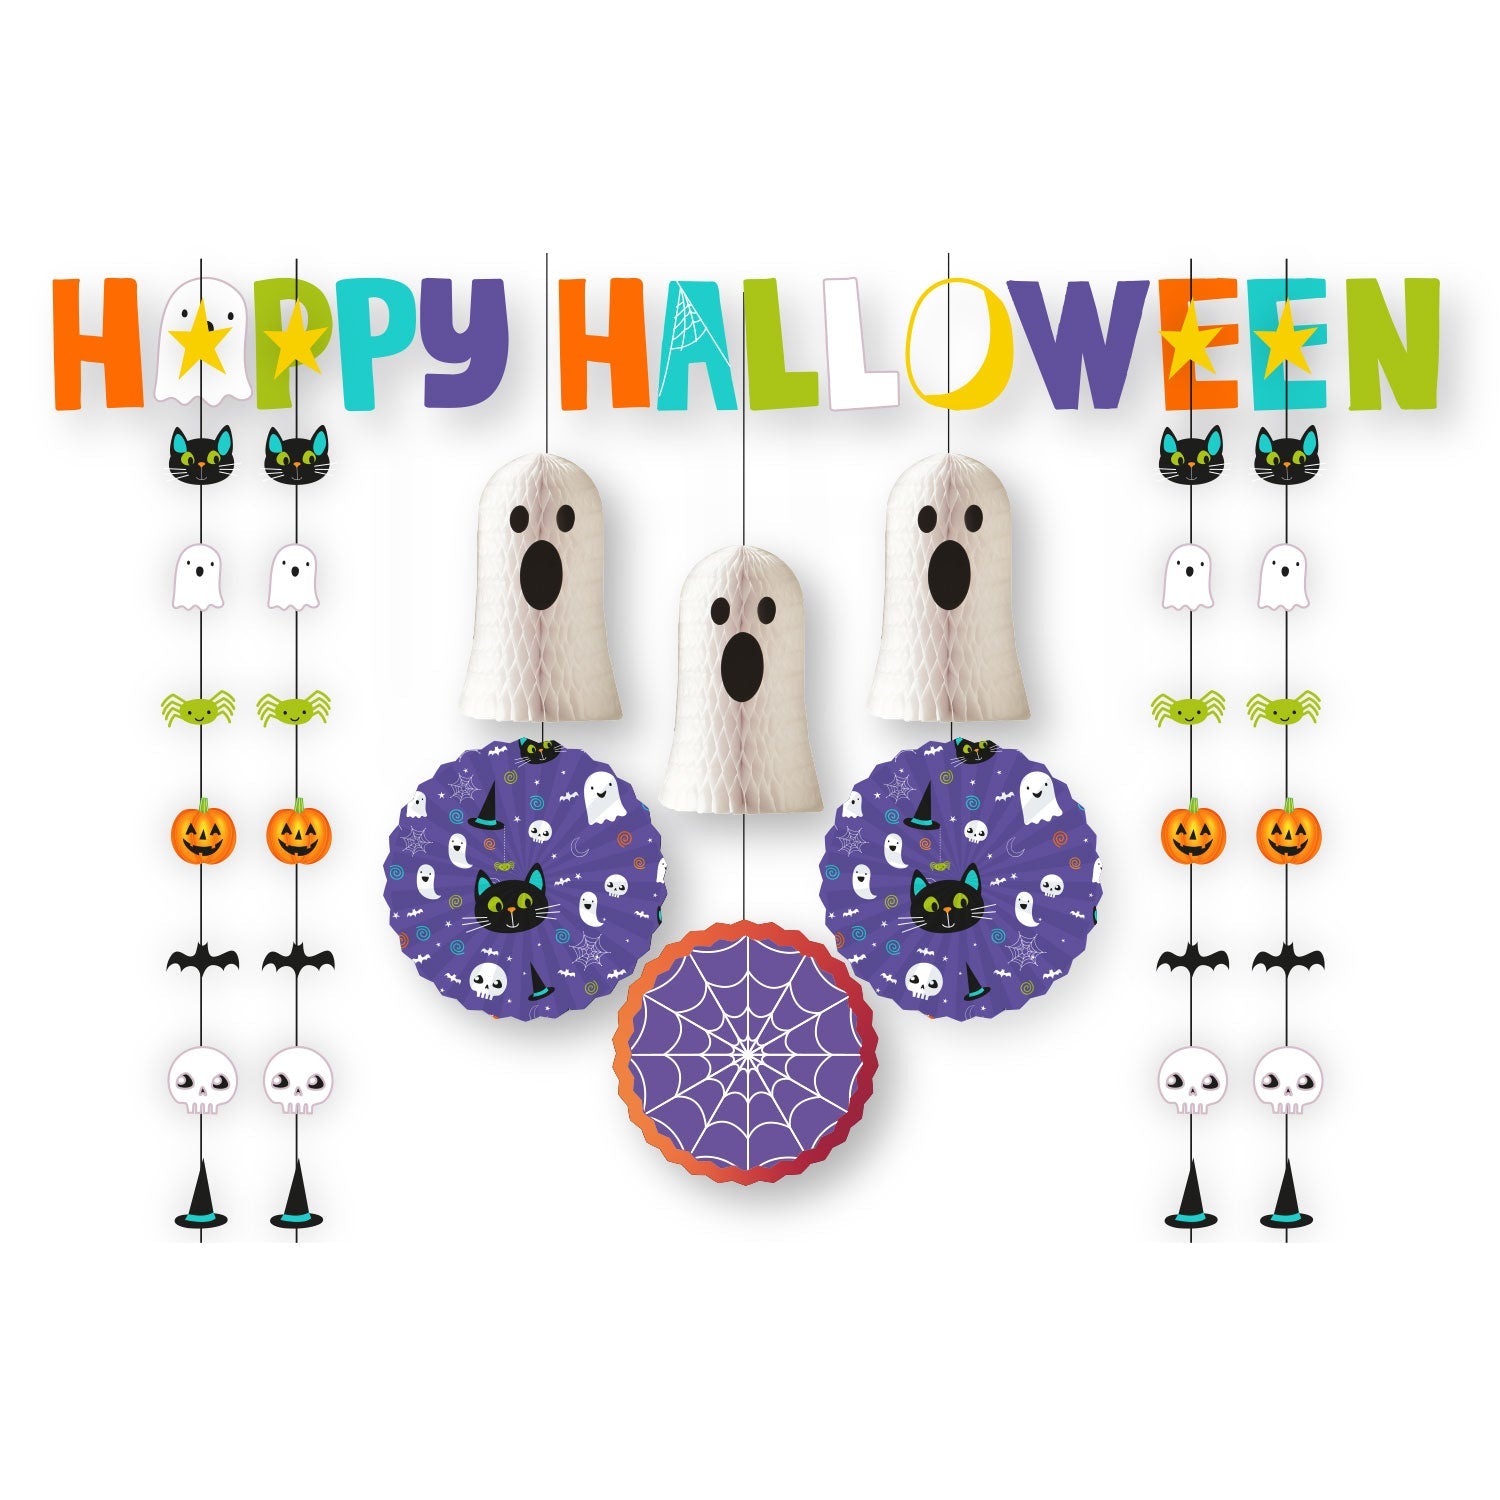 Juvenile Halloween Decorating Kit includes 3 x 30cm Fans, 3 x Honeycomb Ghosts Decorations, 23cm, 1 x Letter Banner, 1.6m and 4 x String Decorations, 1.83m each.